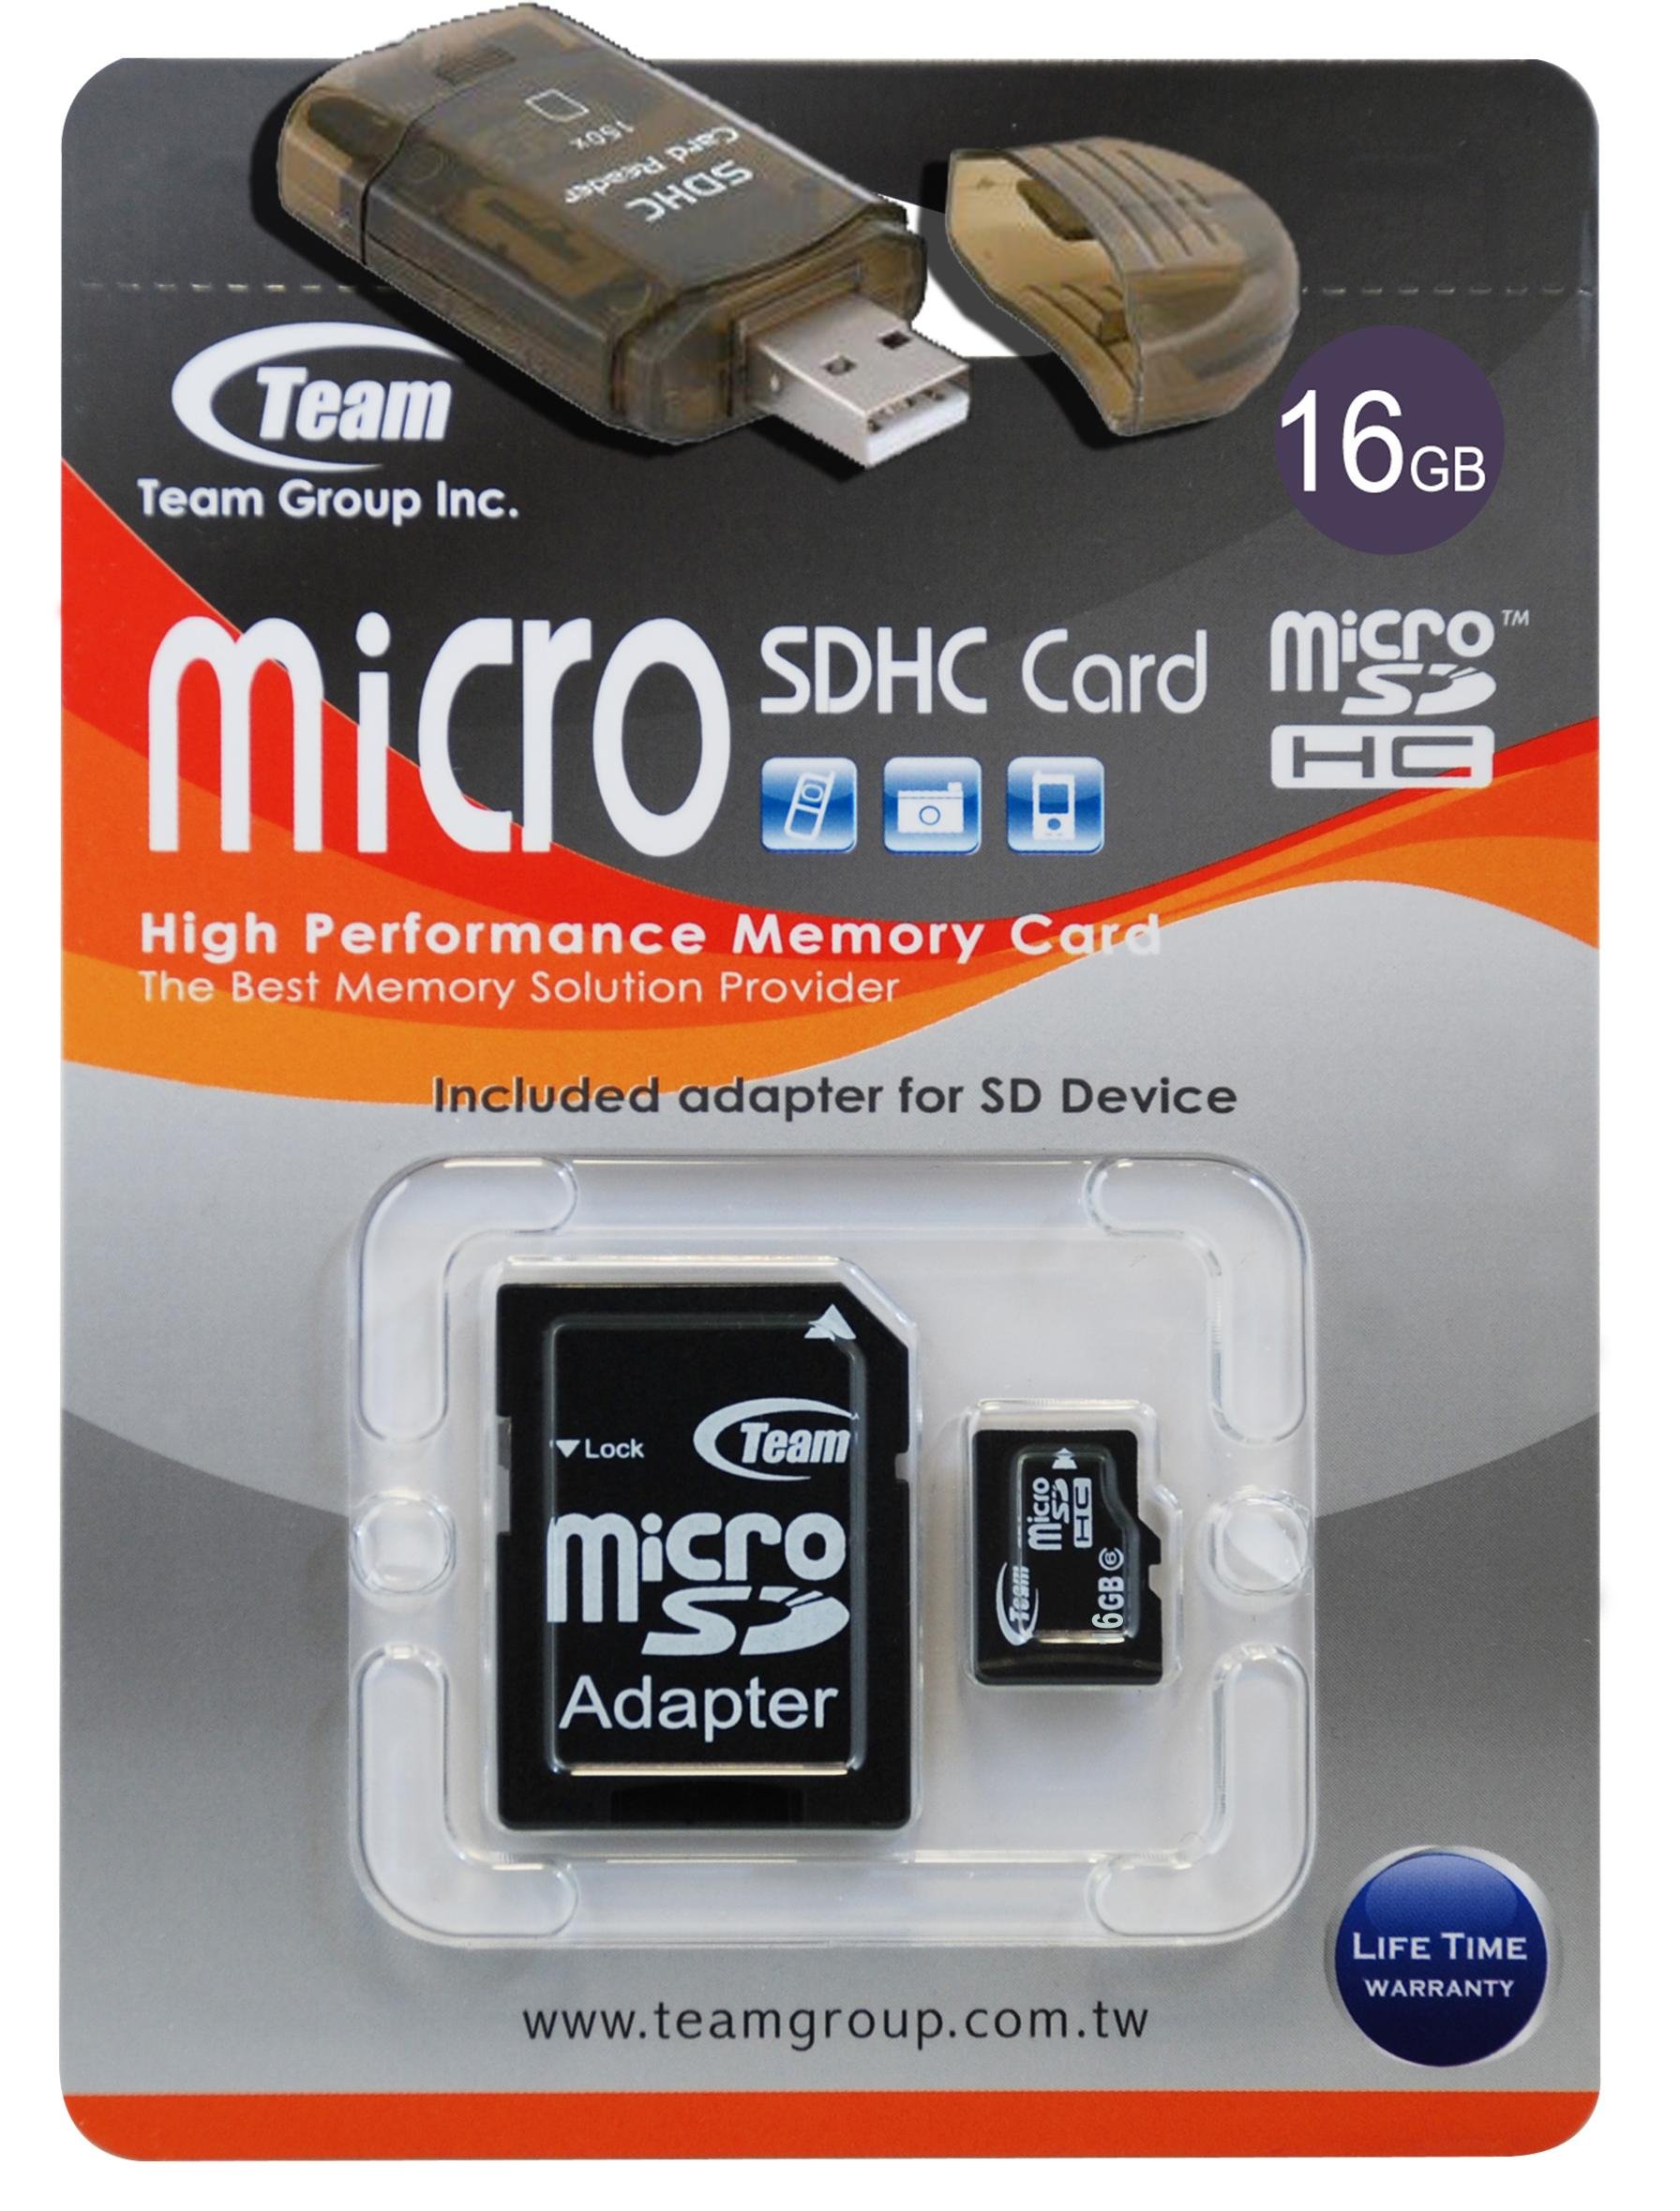 16GB Turbo Speed Class 6 MicroSDHC Memory Card For SAMSUNG S7220 S7350 S8000. High Speed Card Comes with a free SD and USB Ad